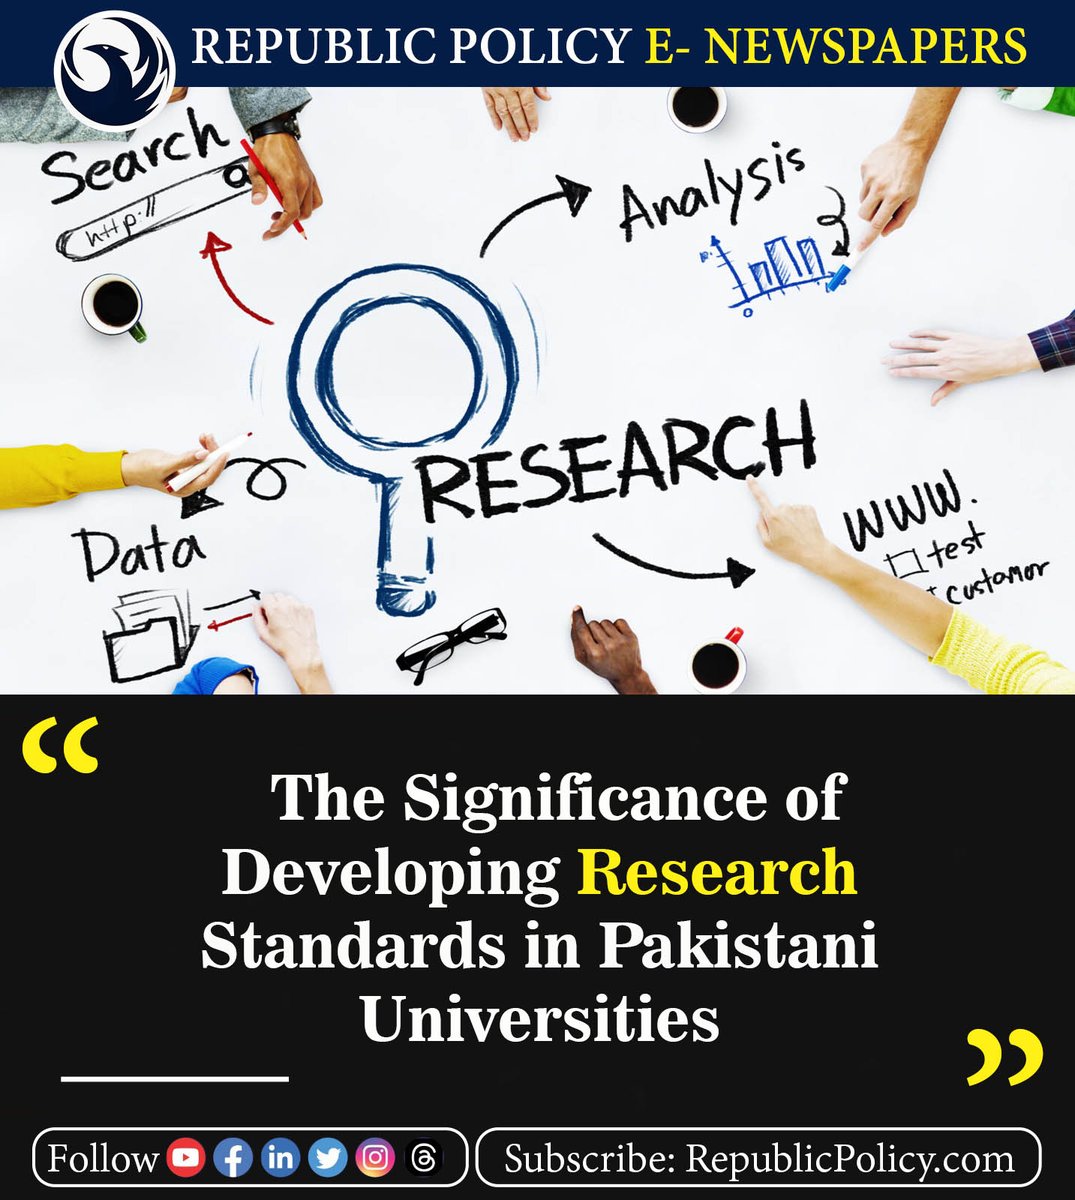 Research and qualitative research are critical for the education standards of universities.

Read more: republicpolicy.com/the-significan…

#ResearchStandards #EducationEnhancement #UniversityStandards #PakistaniUniversities #ResearchSignificance #News